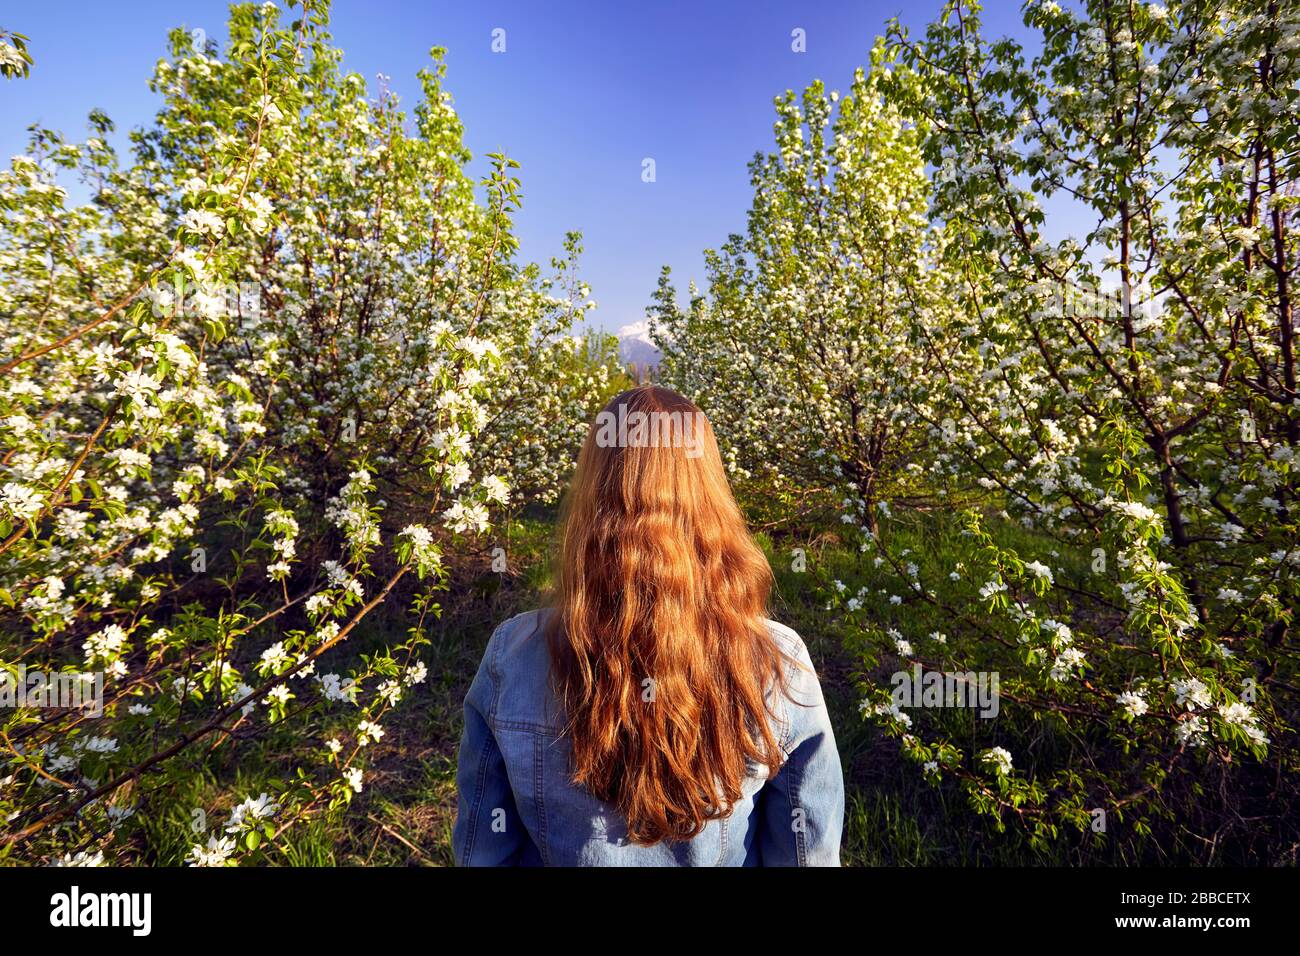 Woman in with red hair in the garden with cherry blossom trees at sunset Stock Photo